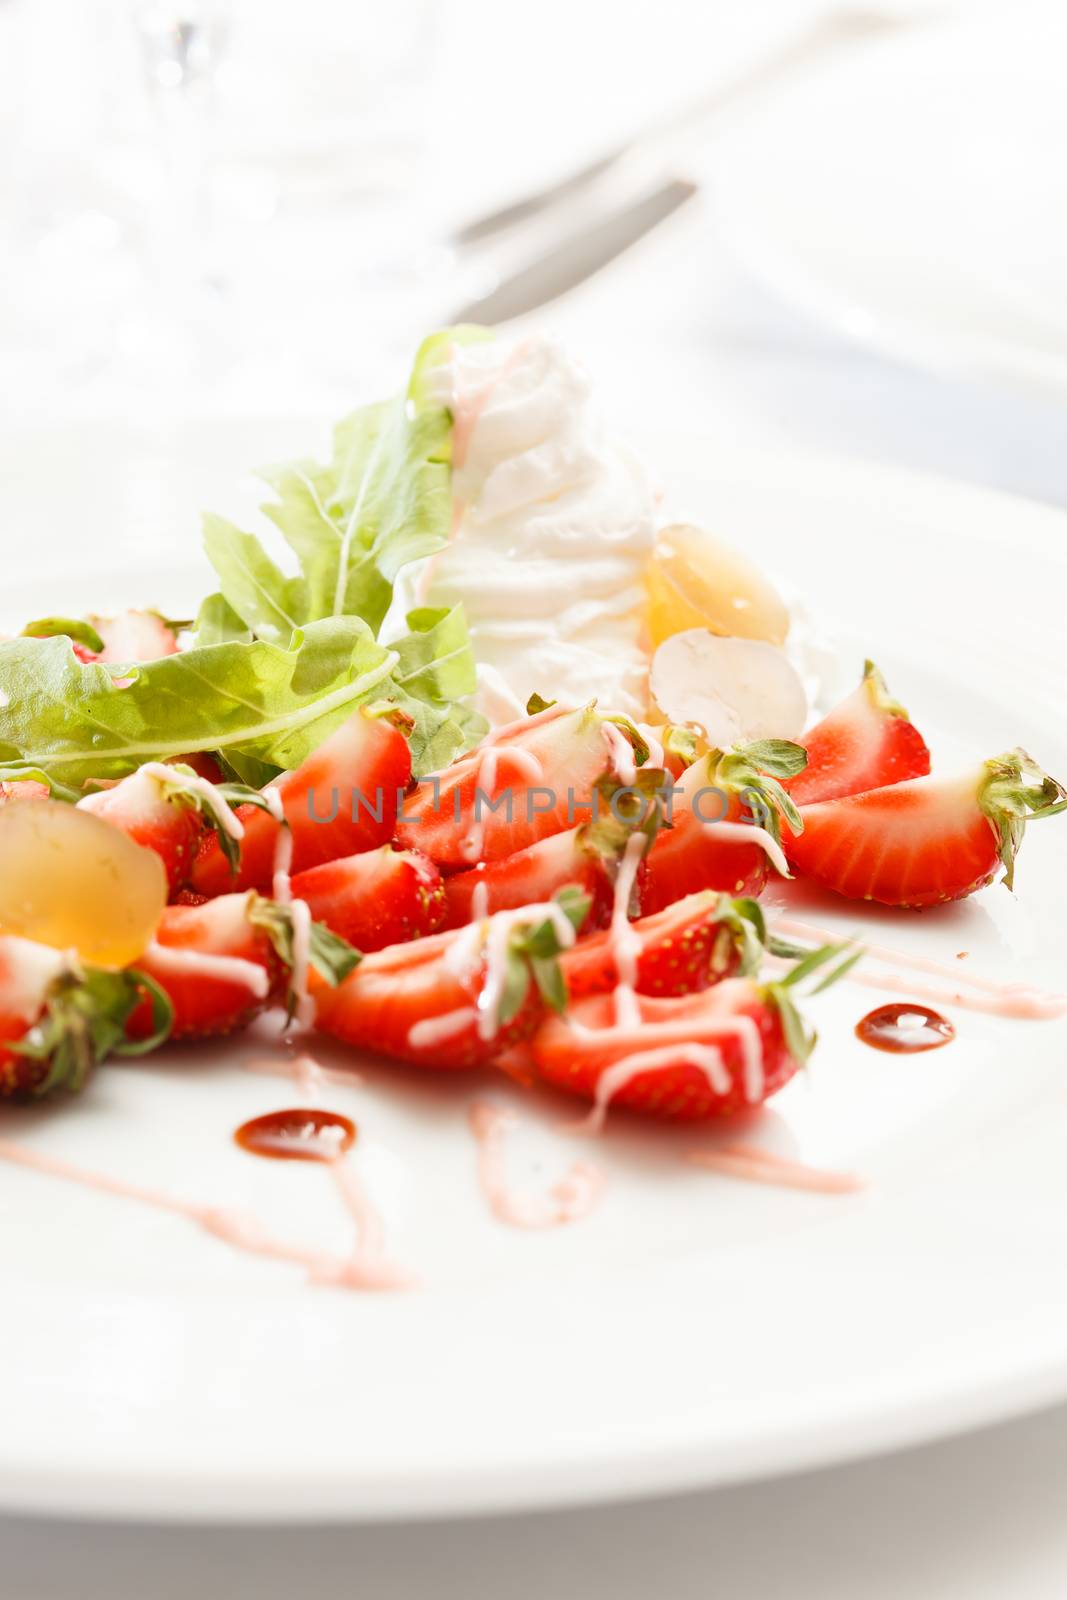 strawberries with sweet sauce by shebeko